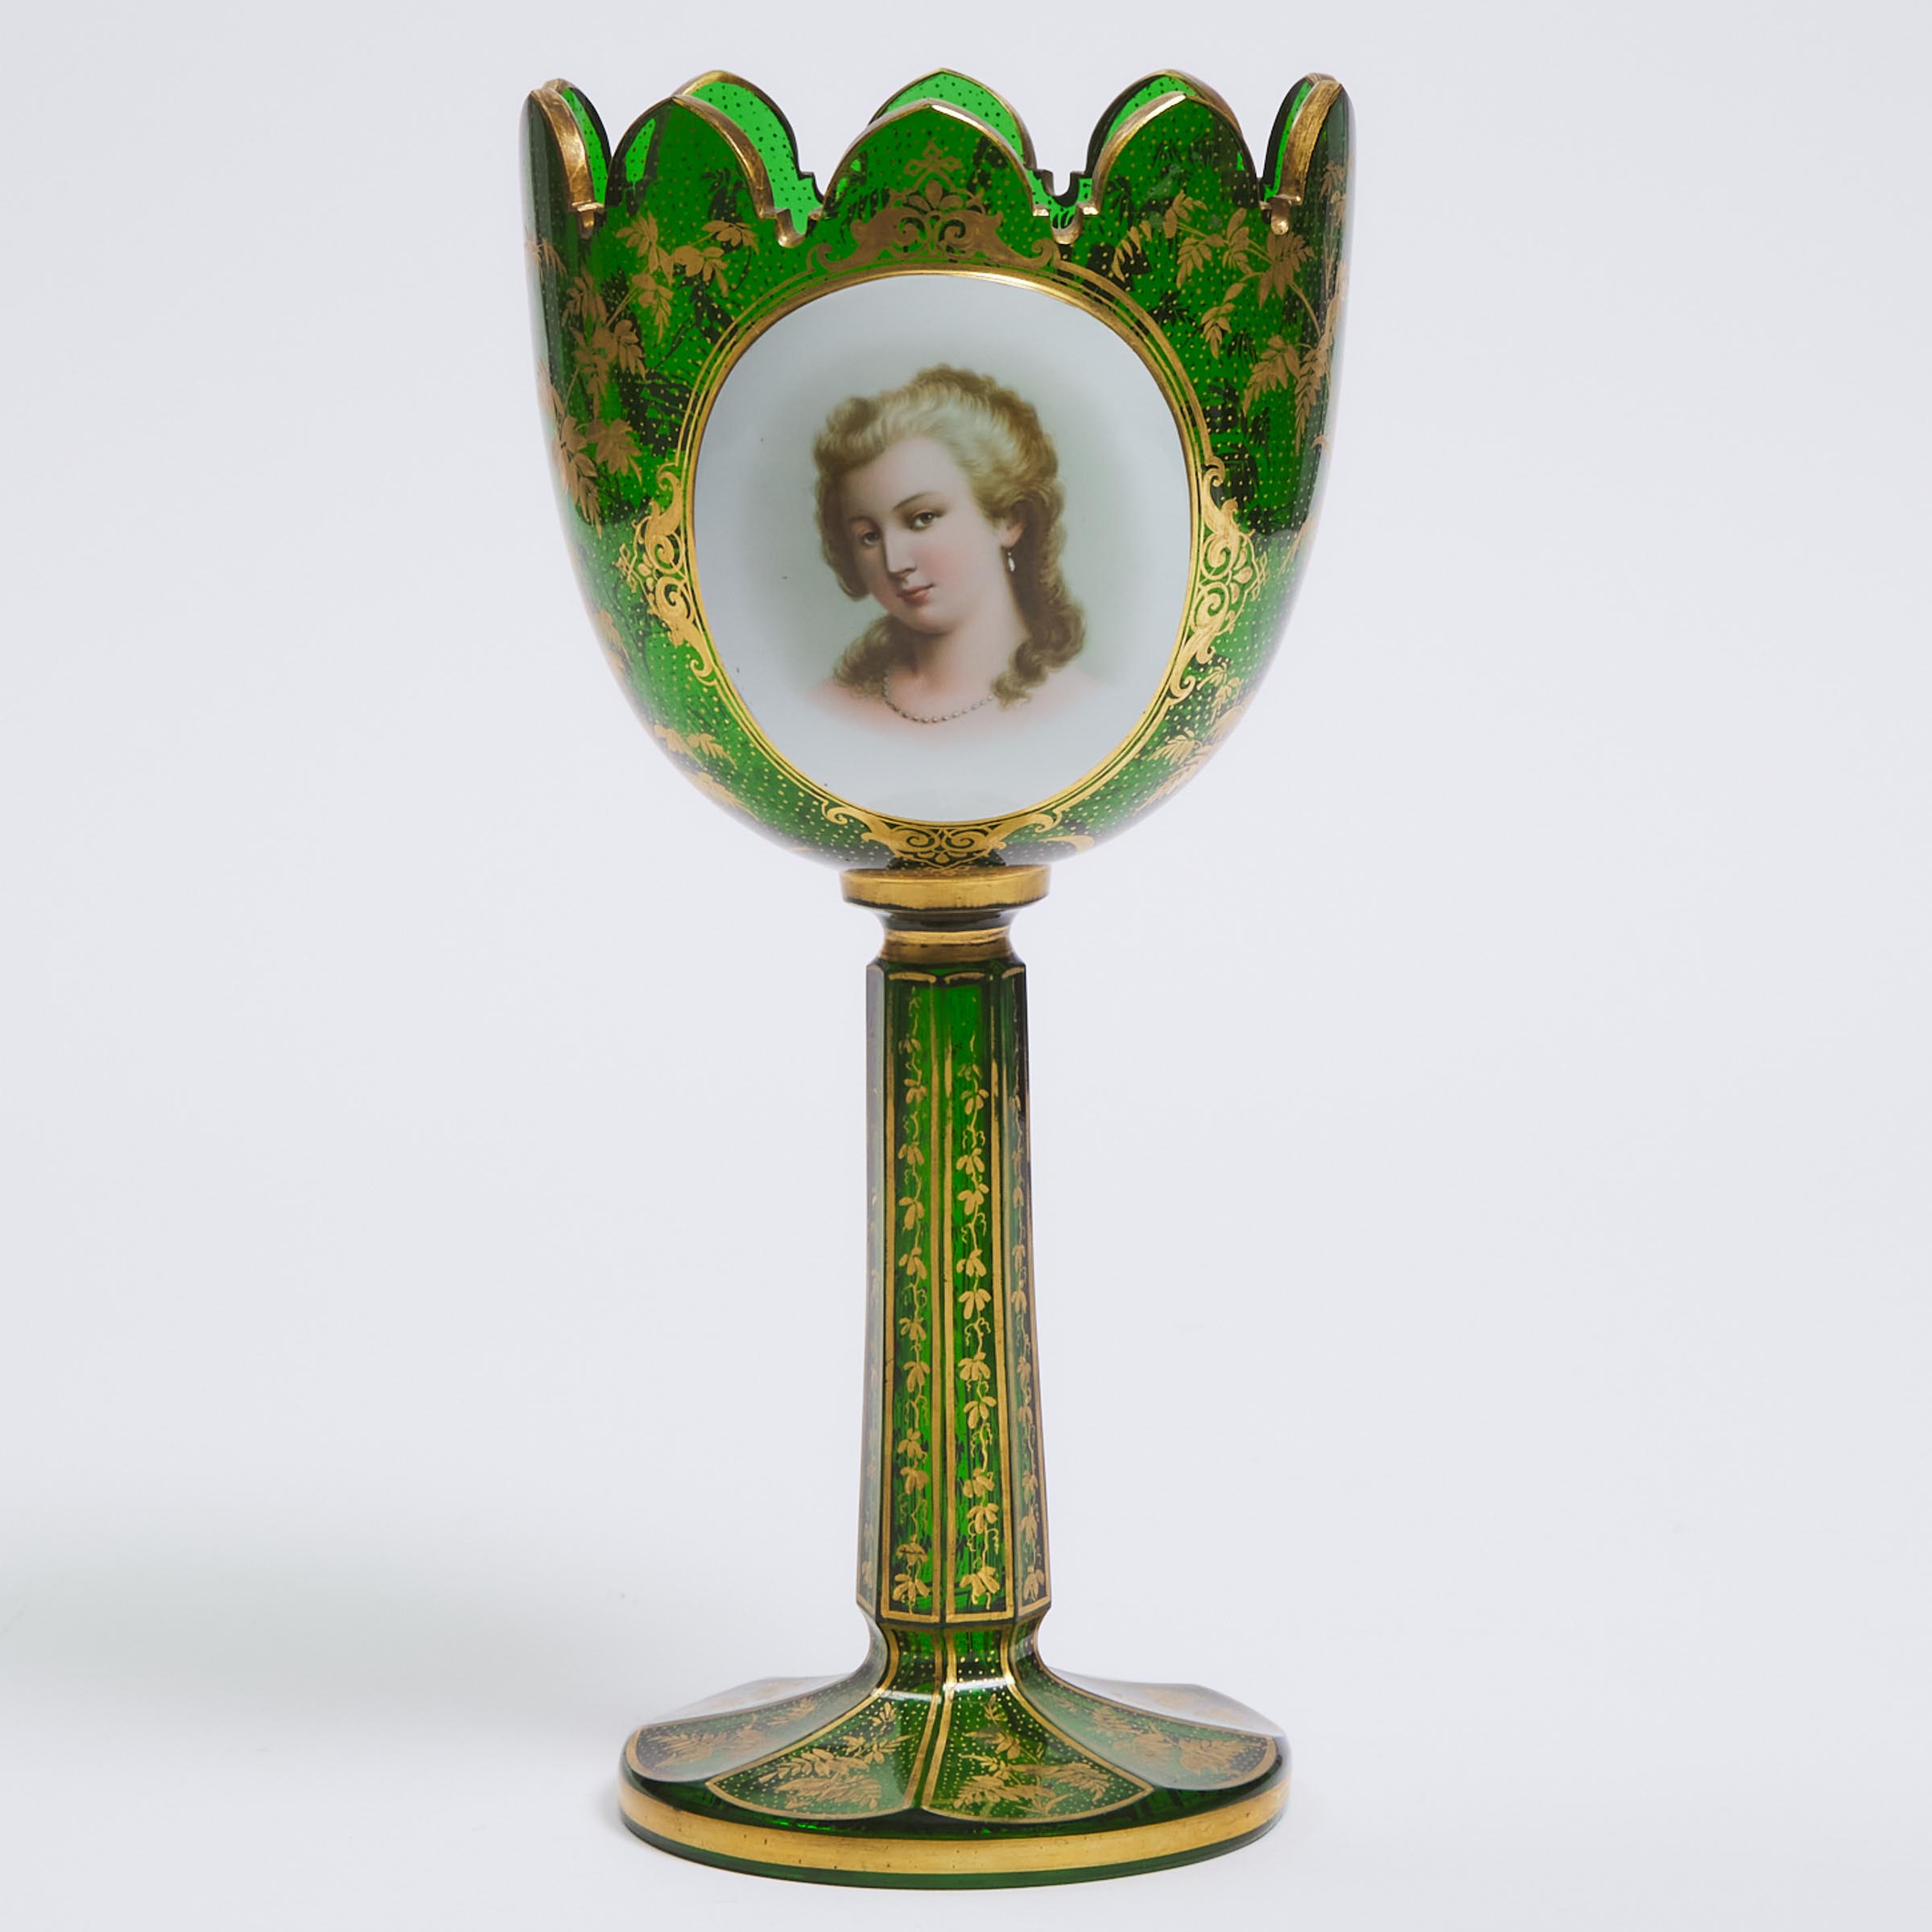 Bohemian Green and Gilt Glass Enameled Portrait Vase, late 19th century